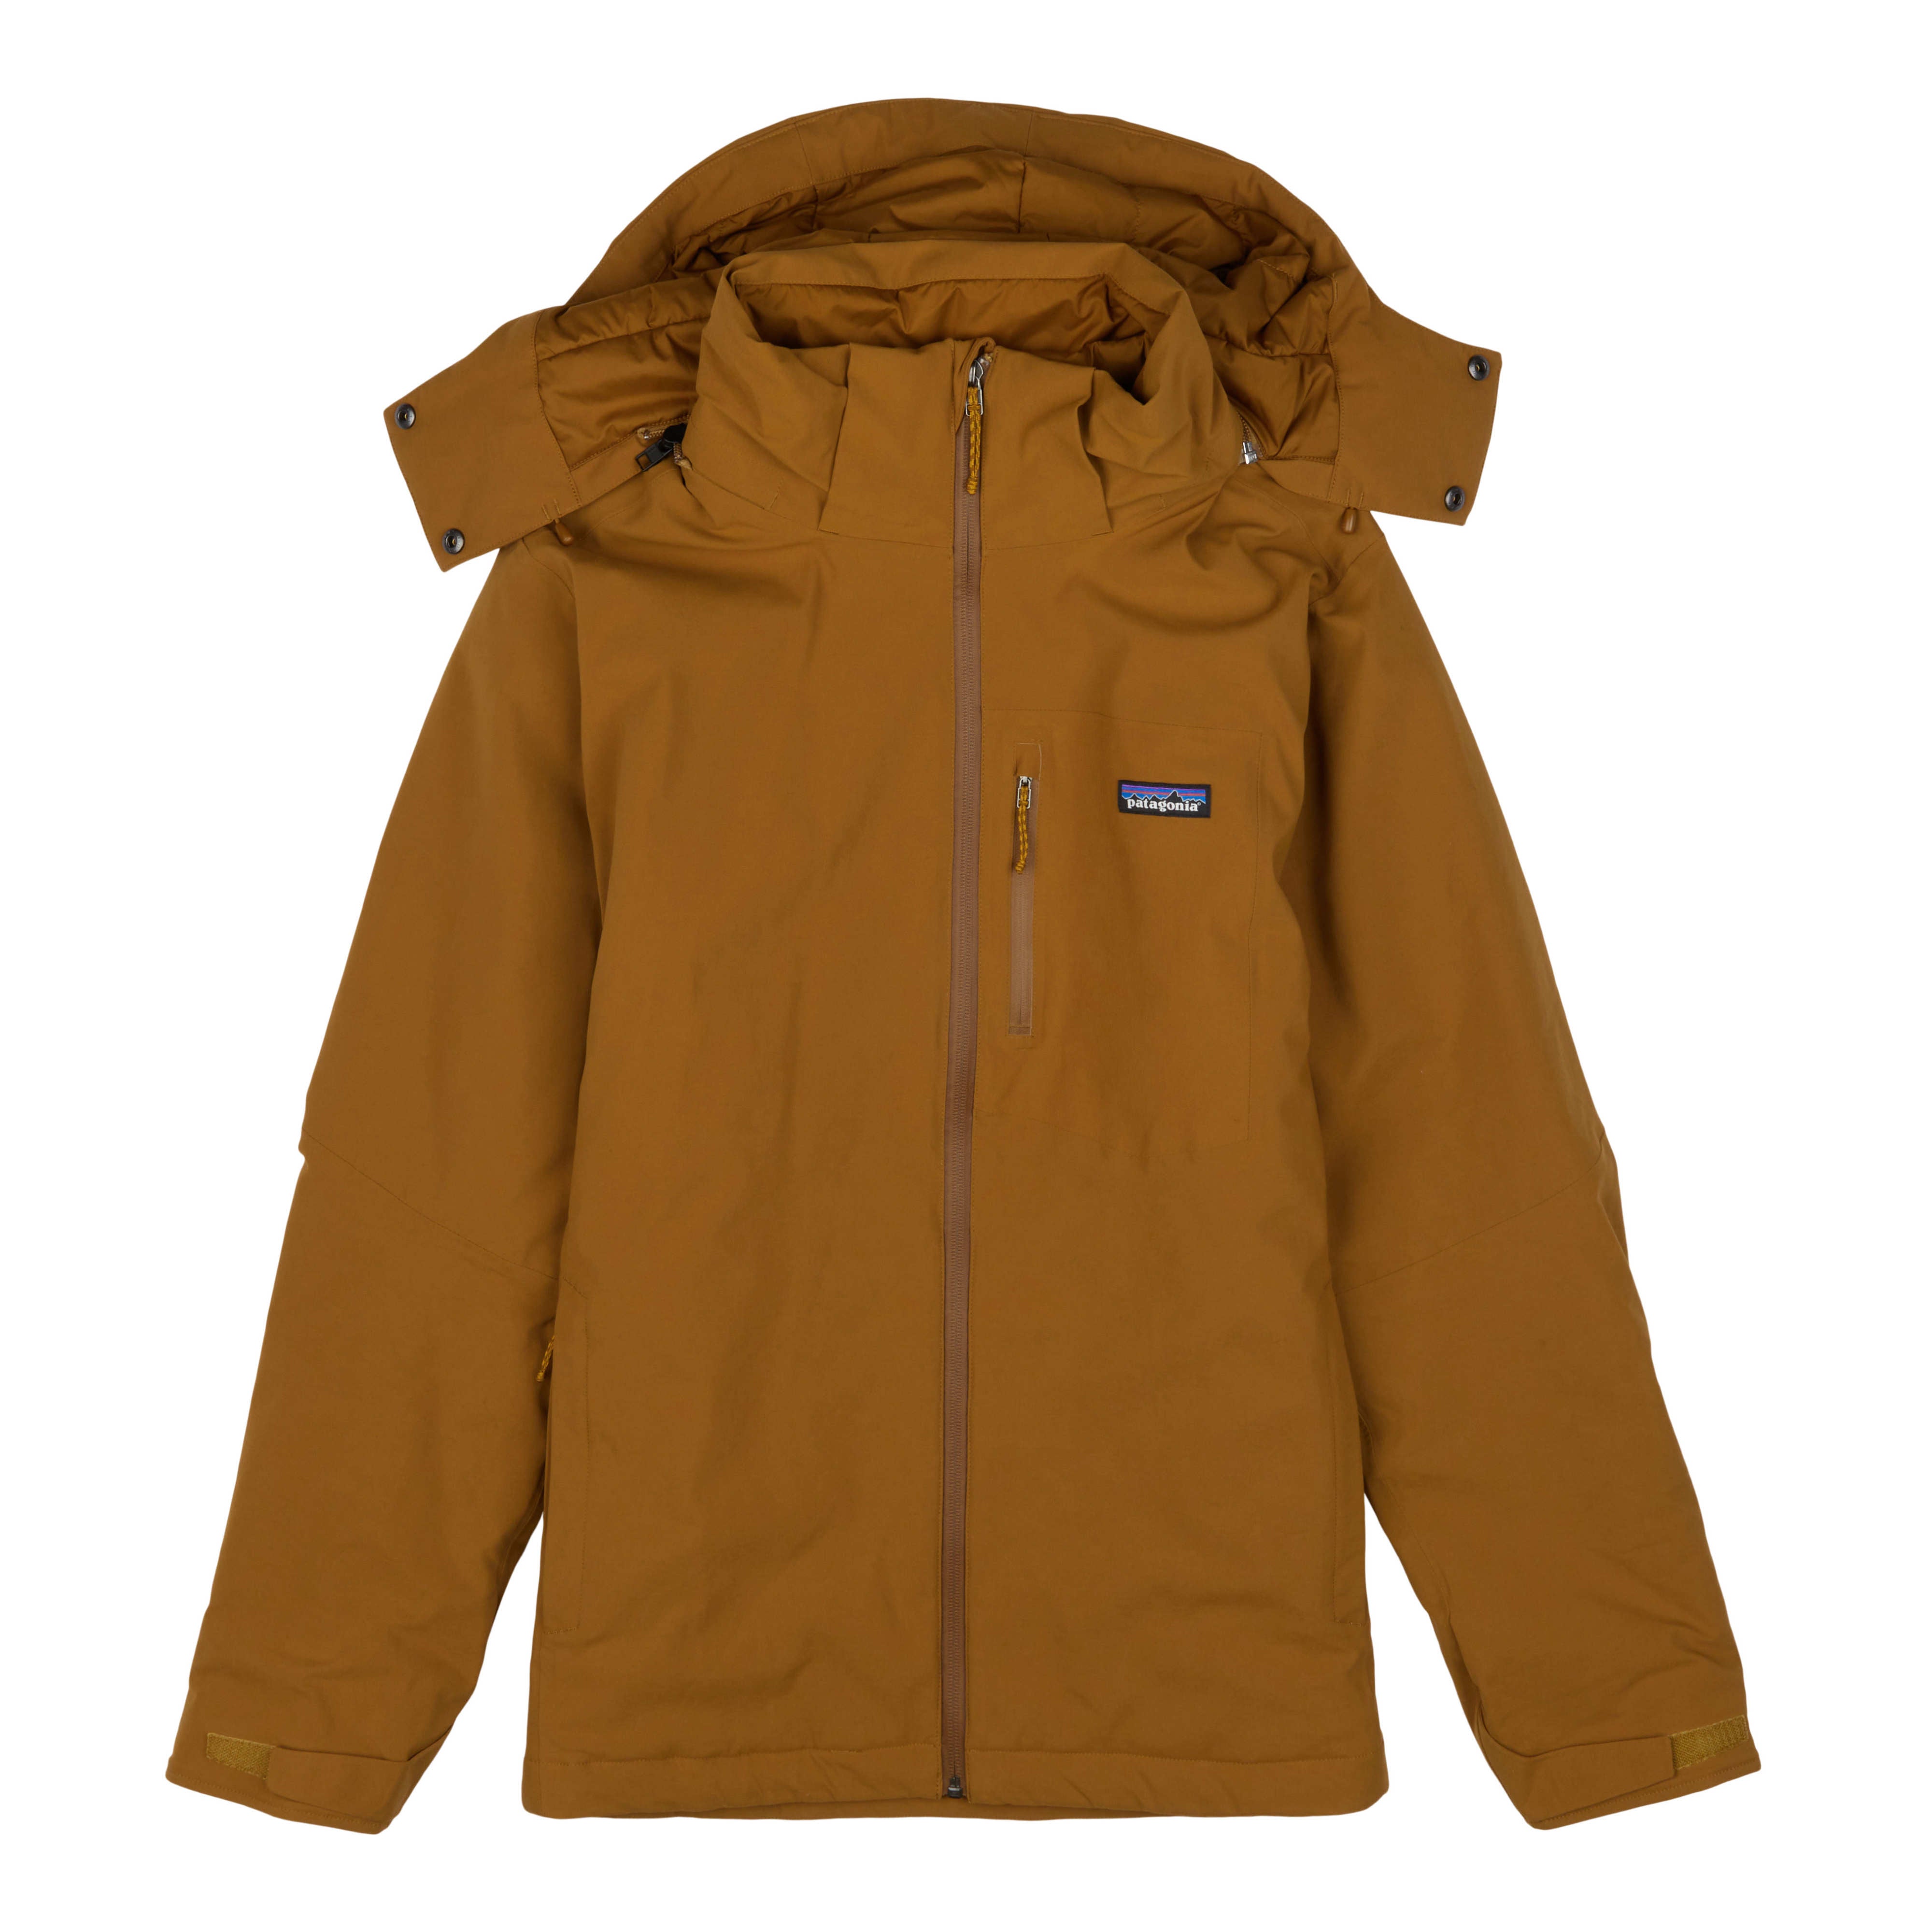 Men's Insulated Quandary Jacket